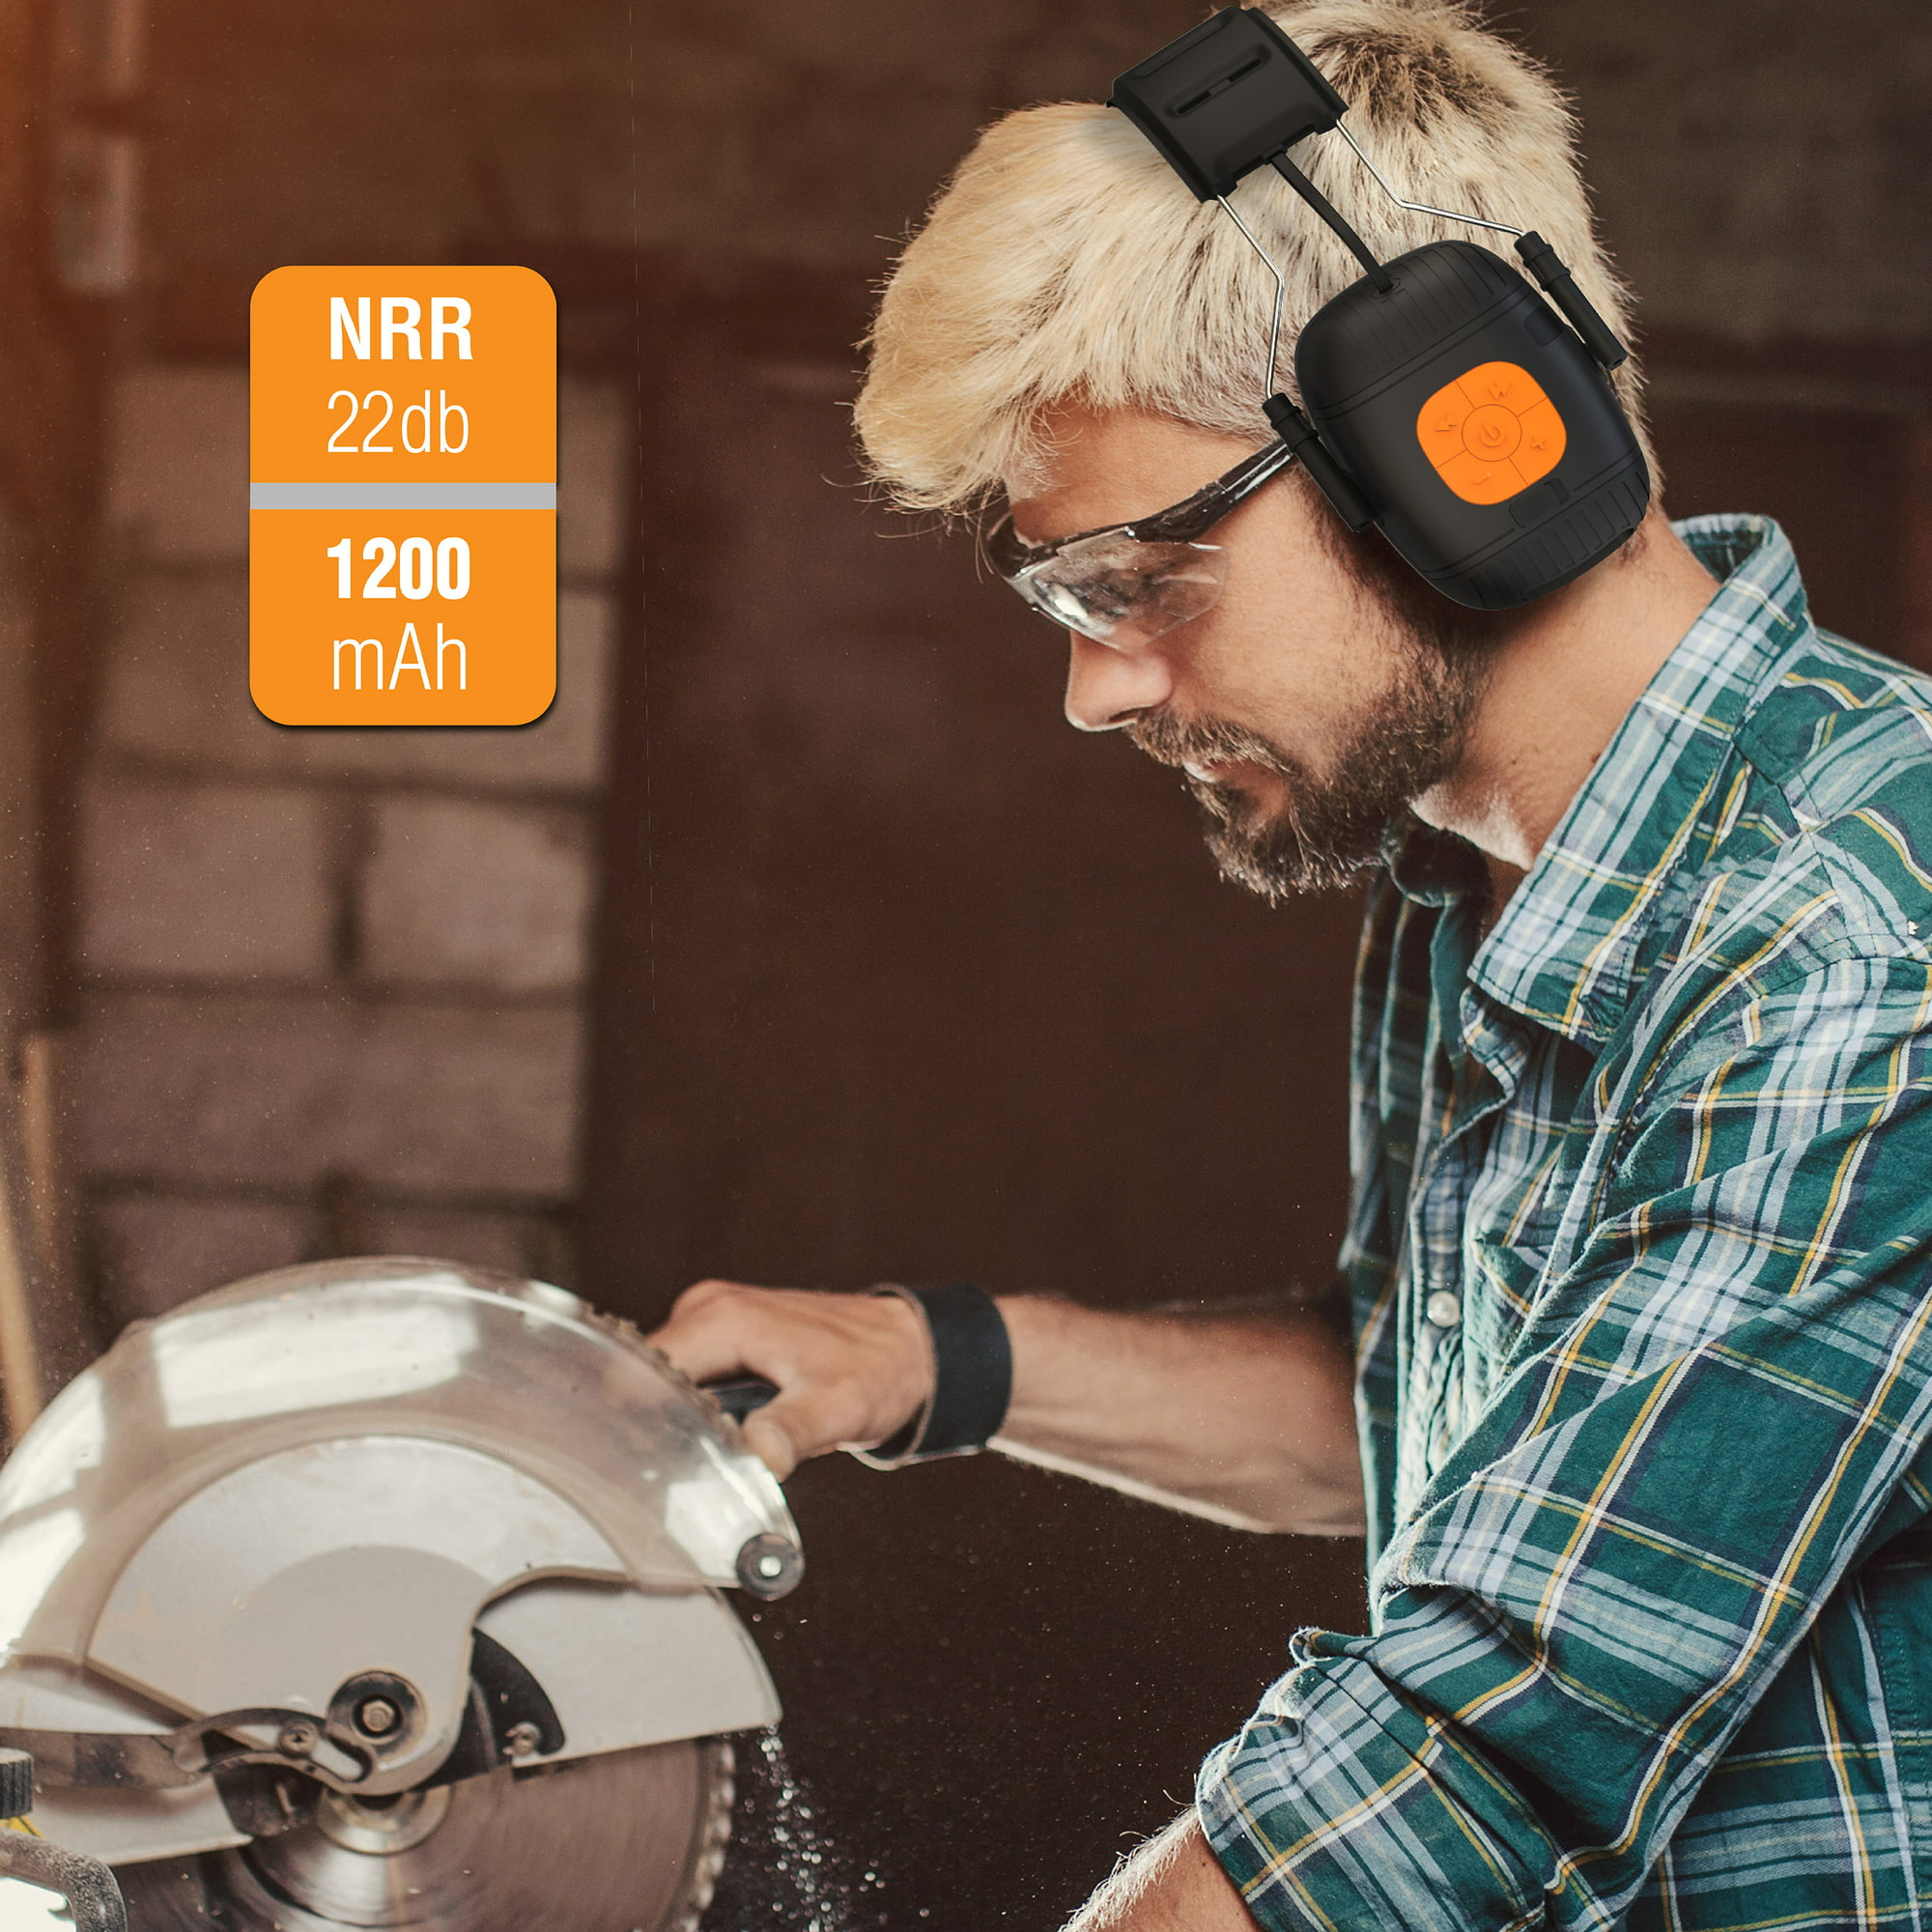 Tzumi SoundGuards, Noise-Cancelling Bluetooth Headphones, Hearing Protection Ear Muffs